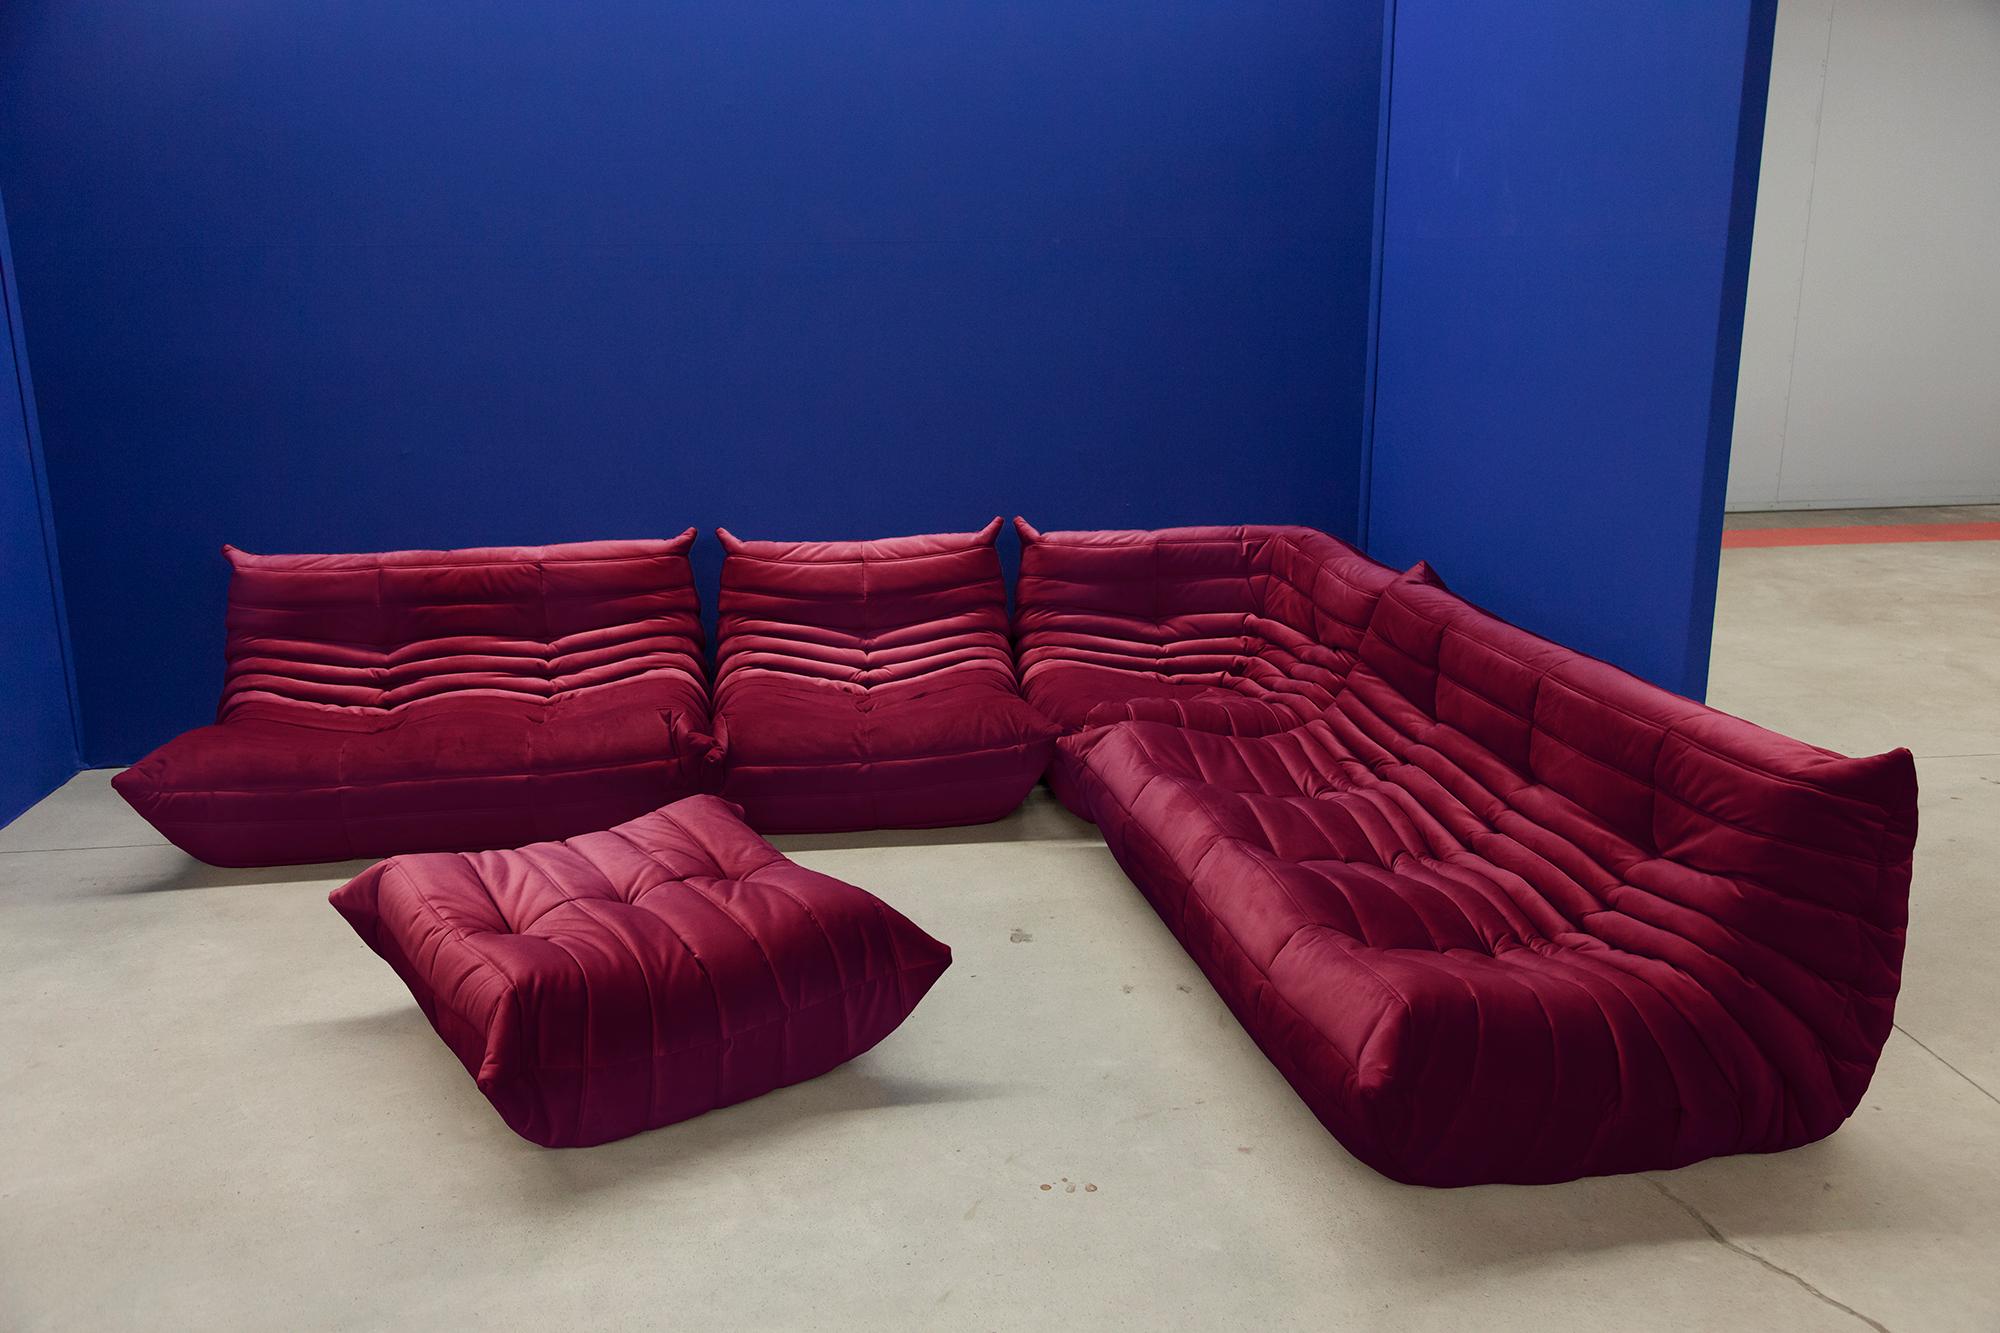 This Togo living room set was designed by Michel Ducaroy in 1974 and was manufactured by Ligne Roset in France. Each piece has the original Ligne Roset logo and genuine bottom. It has been reupholstered in genuine high quality burgundy red velvet